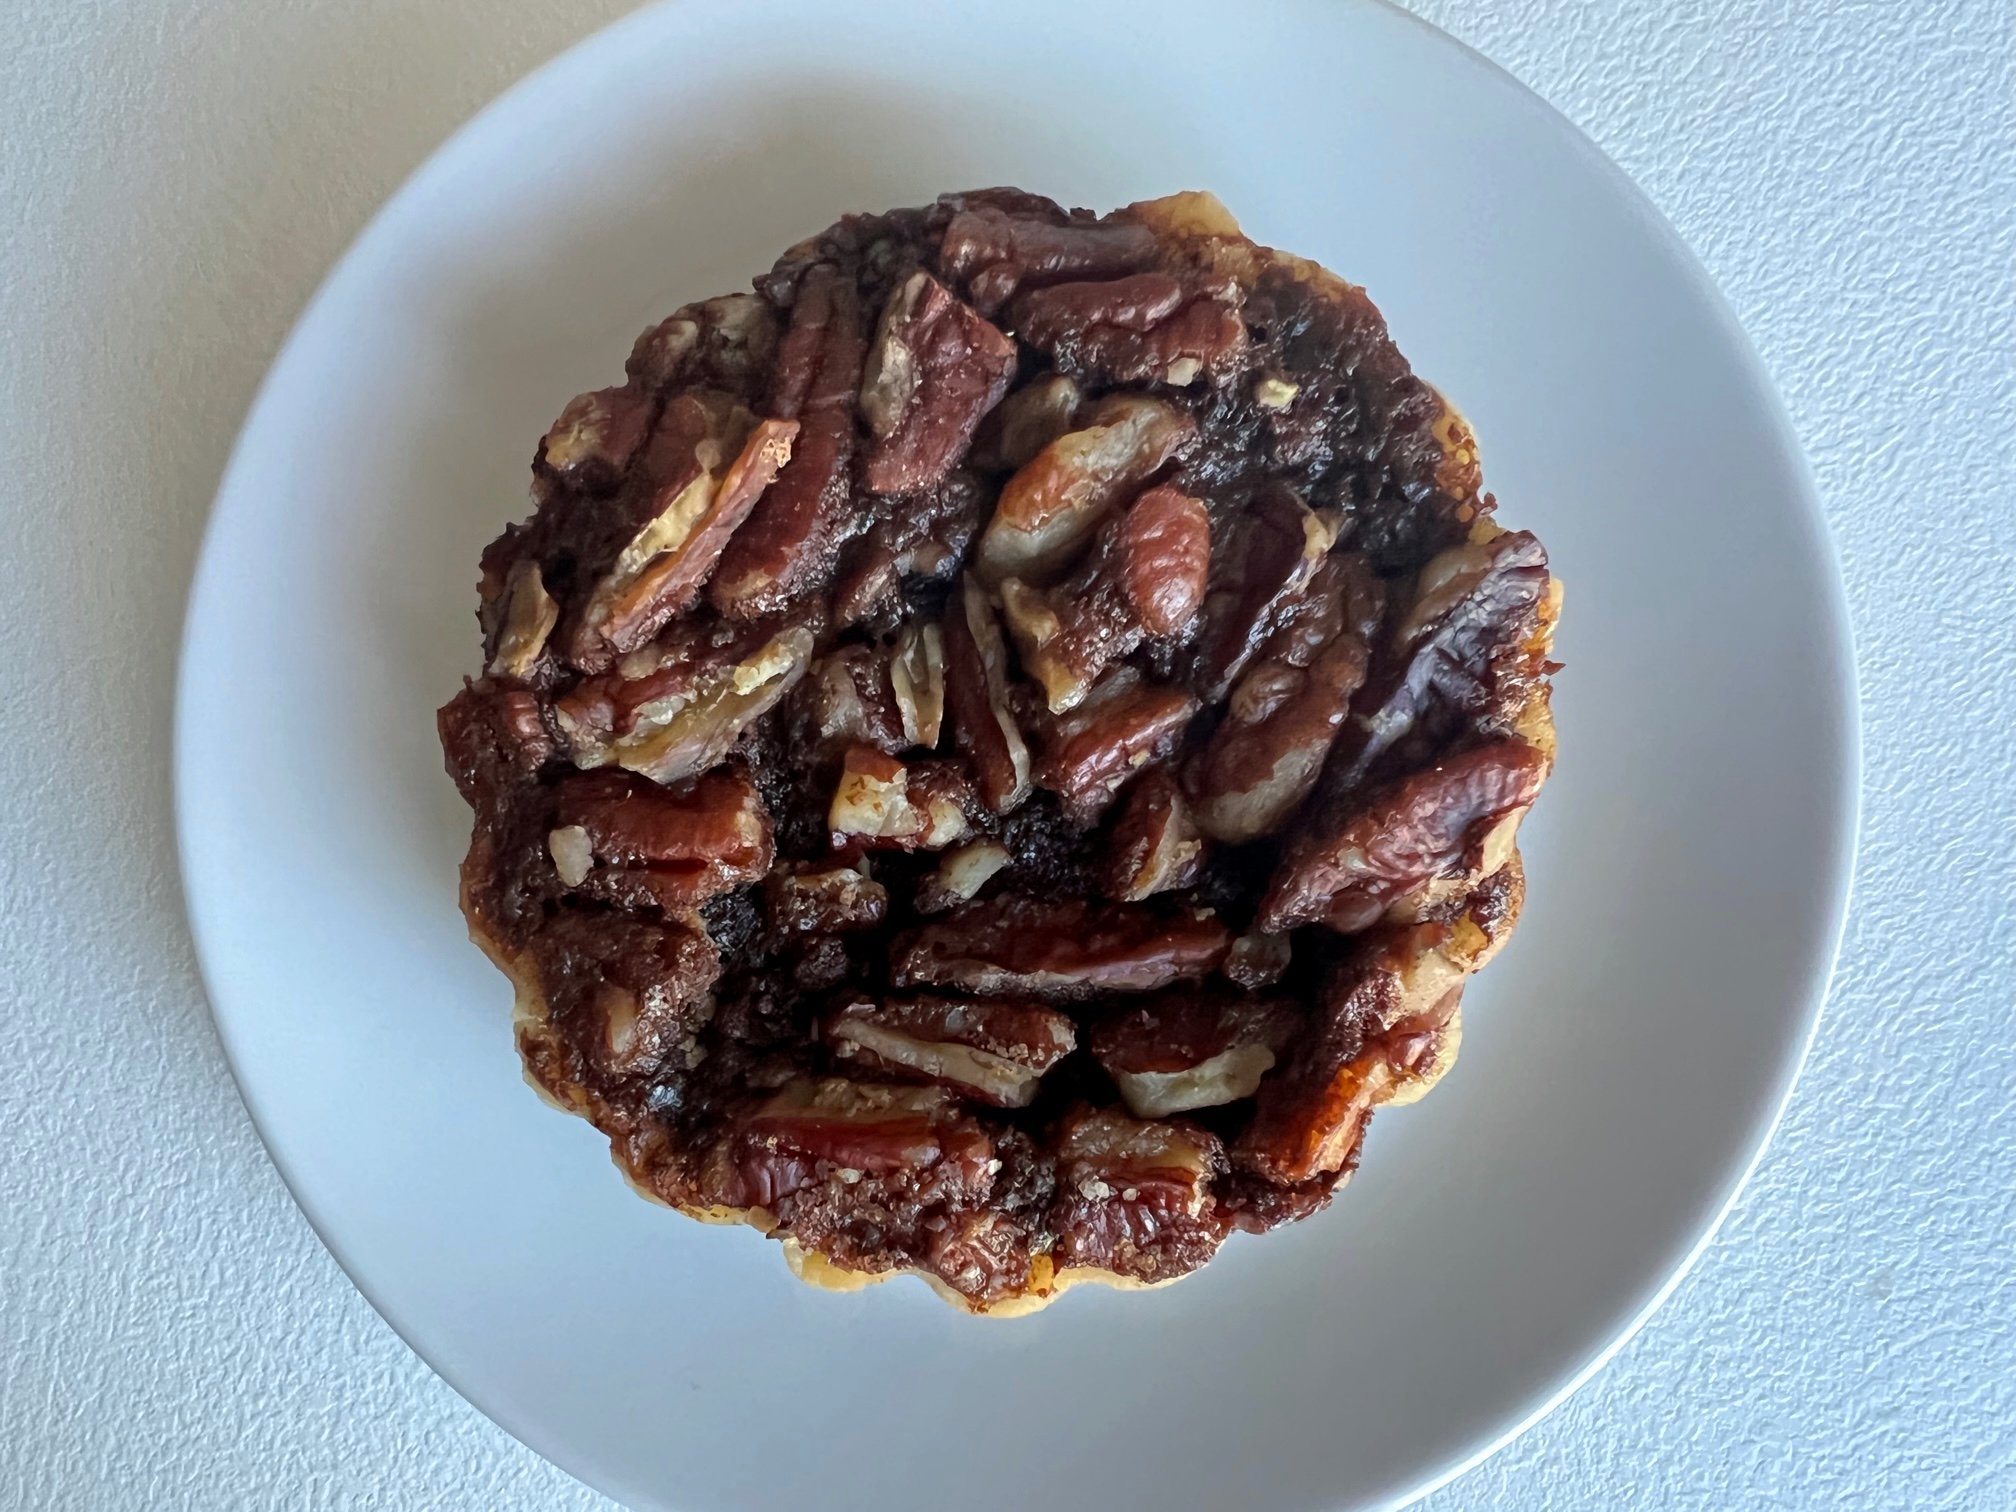 On a white plate, there is a mini chocolate pecan pie. Photo by Alyssa Buckley.